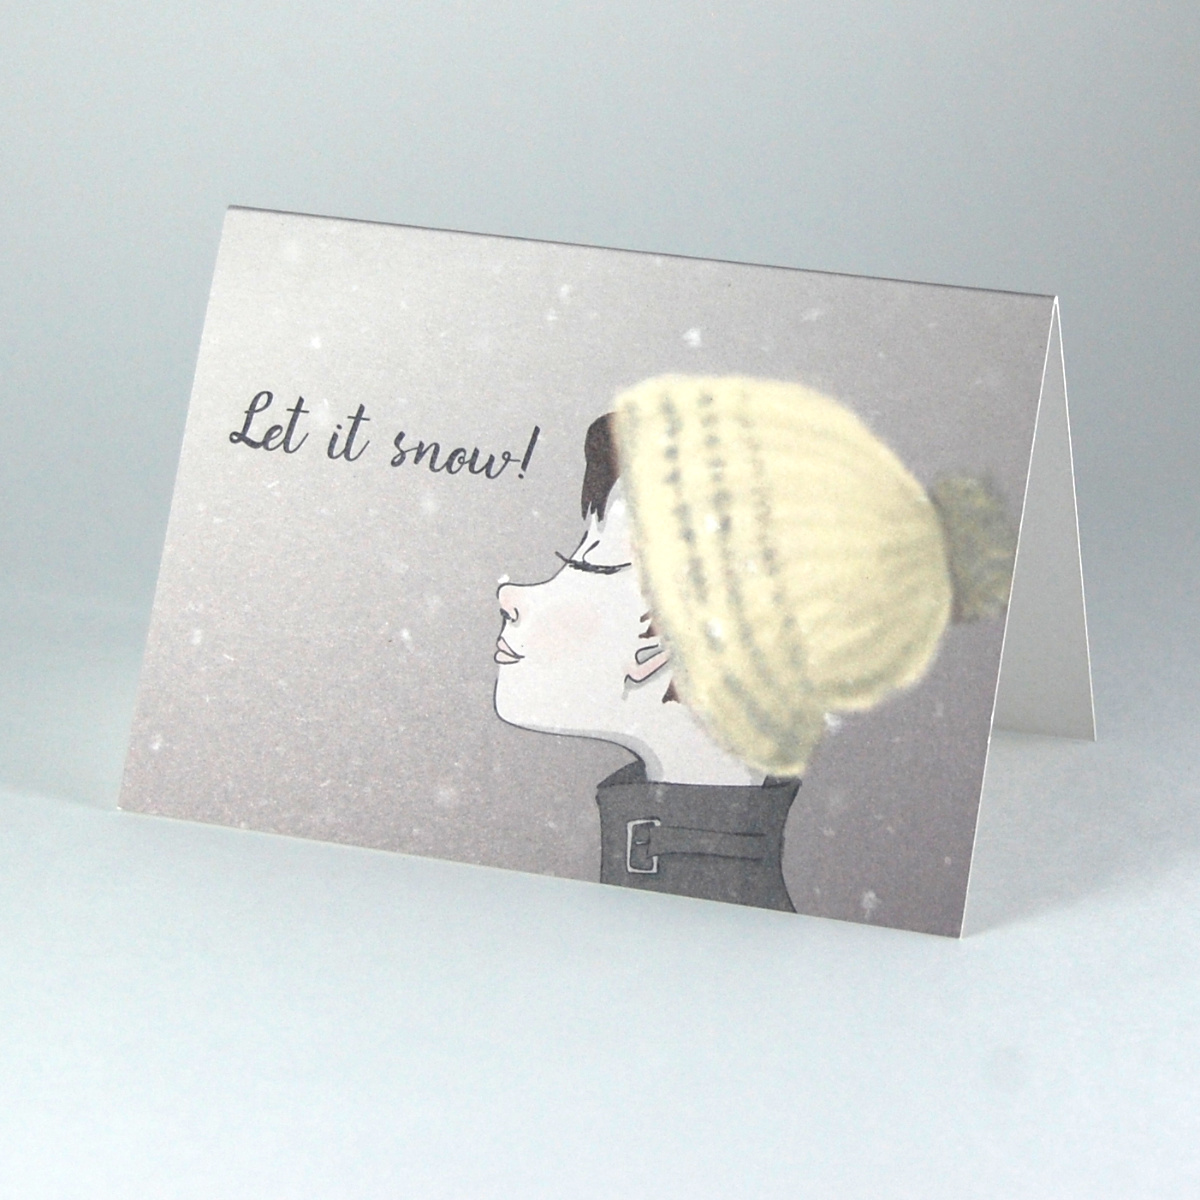 Eco Friendly Christmas Cards: Let it snow!